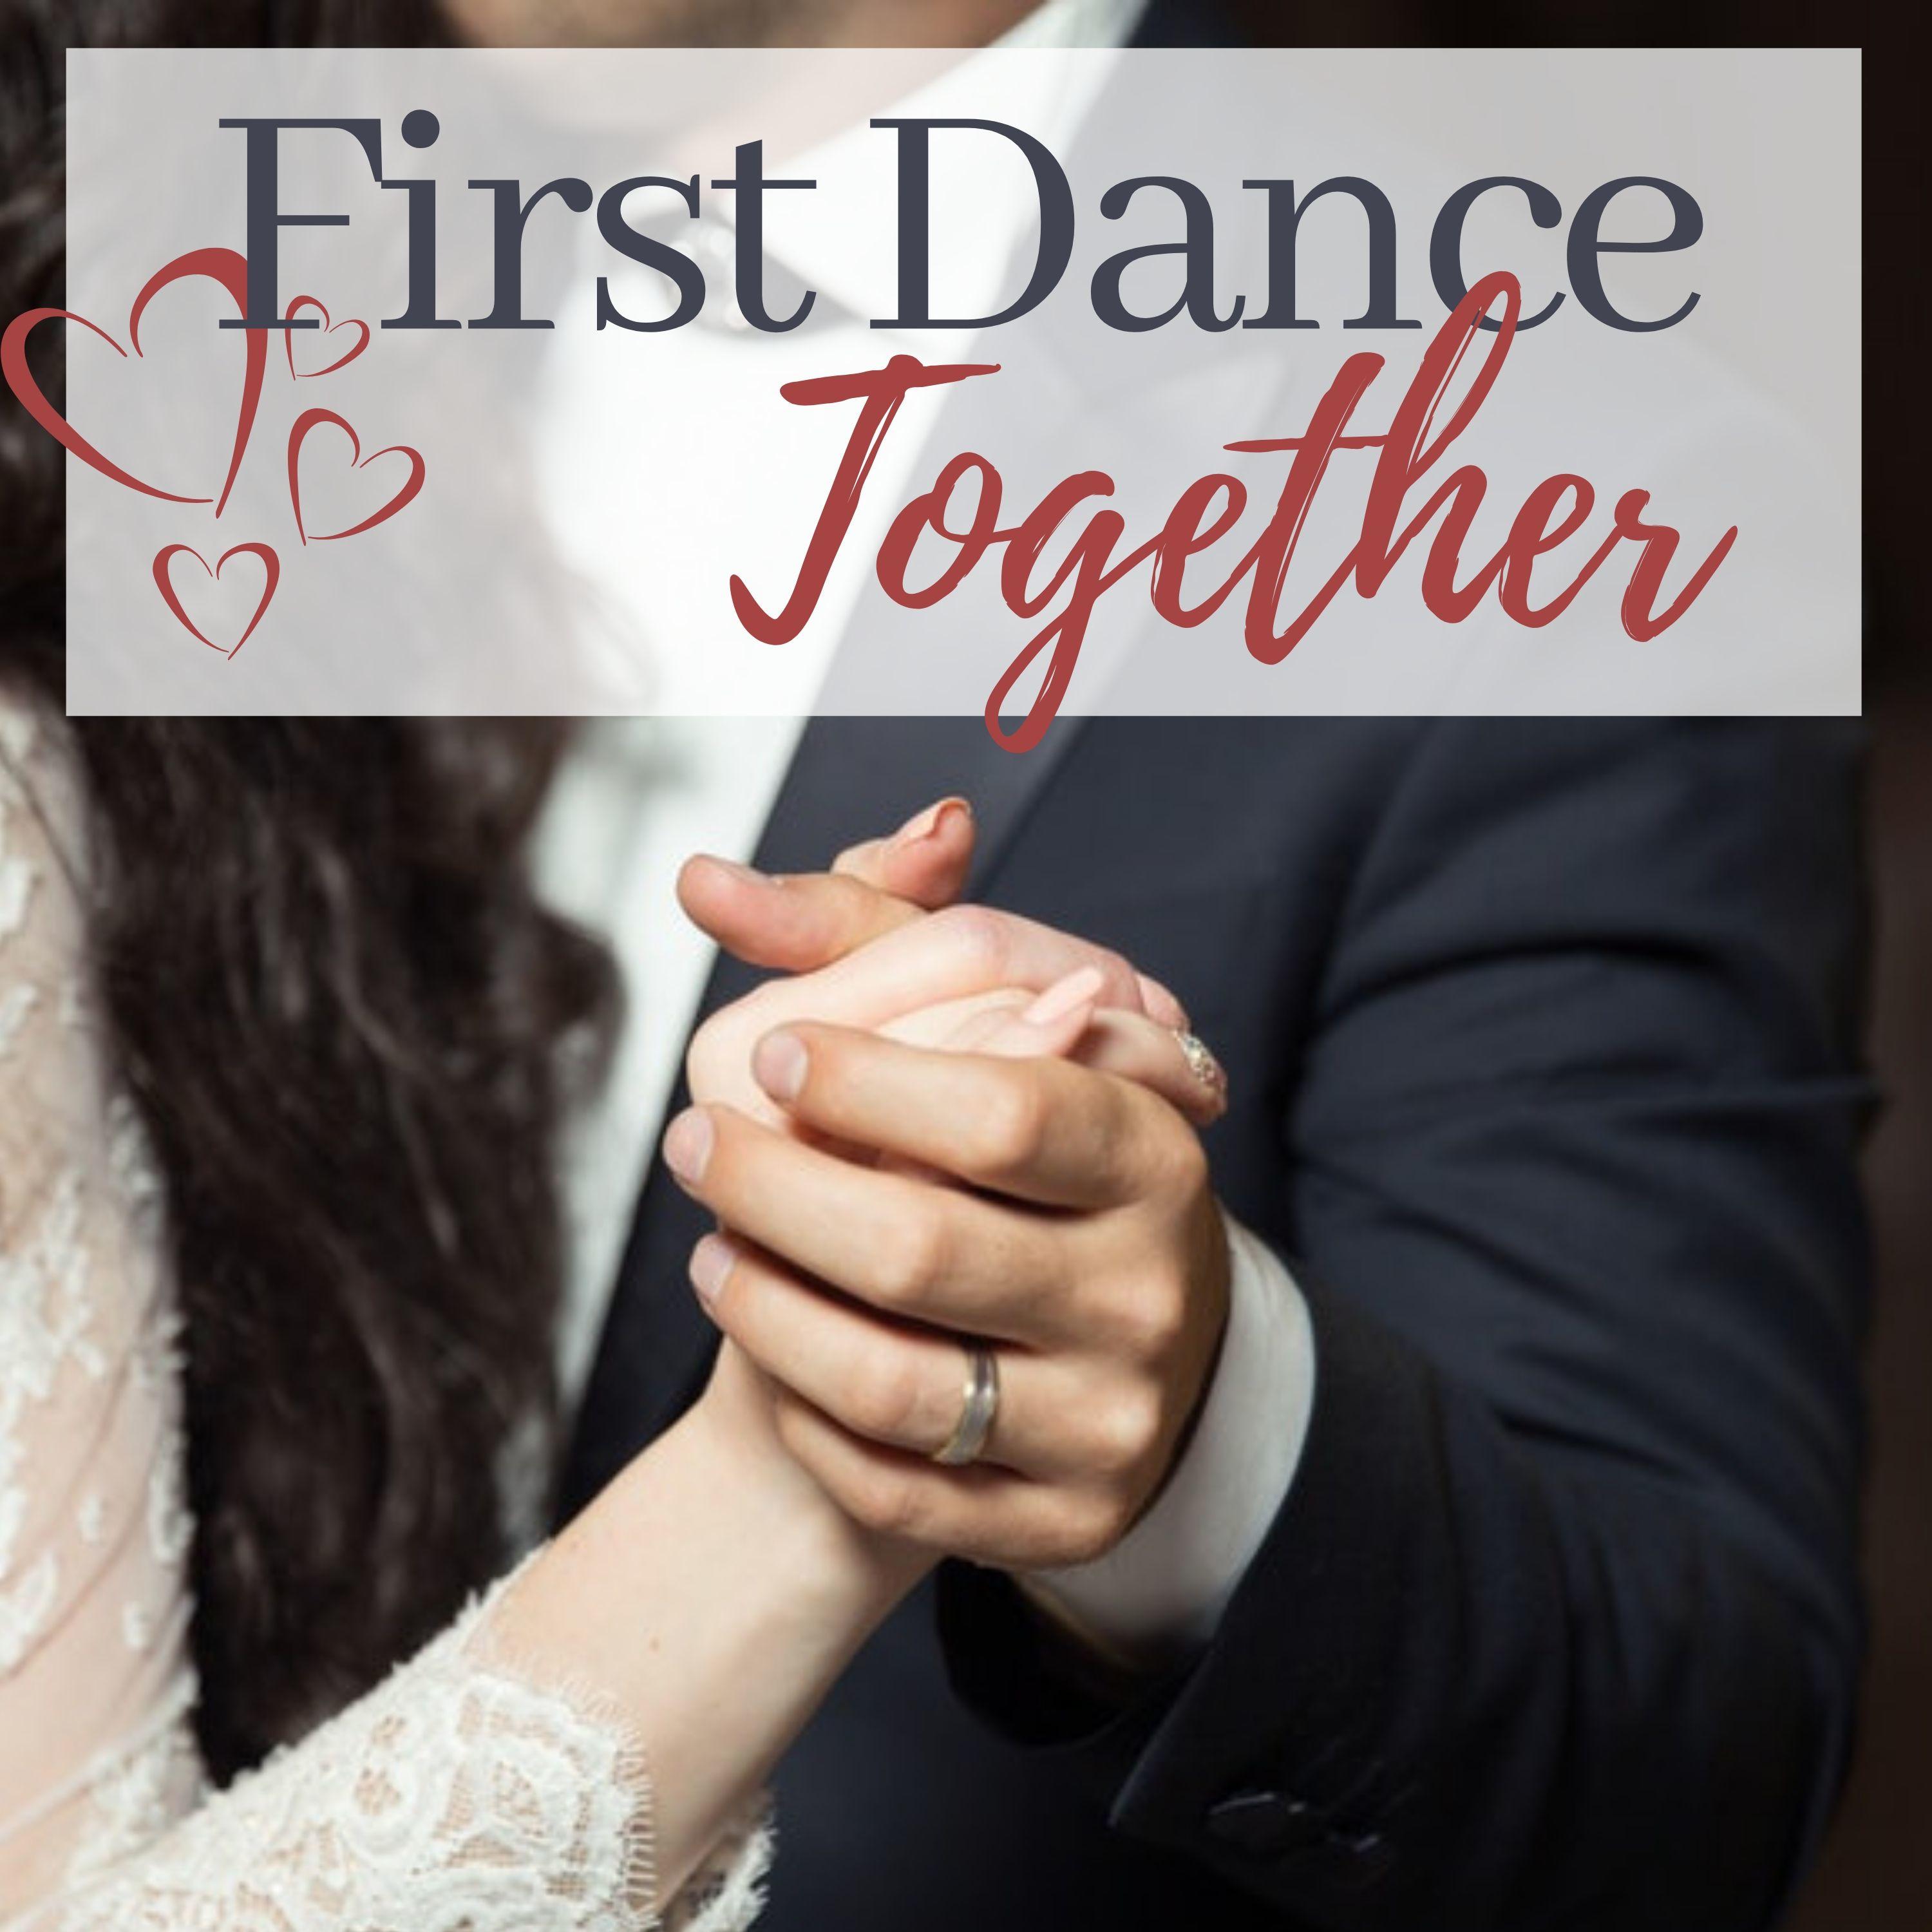 First Dance Together - Romantic Piano Songs, Calming and Peaceful Wedding Music for Sweet Moments